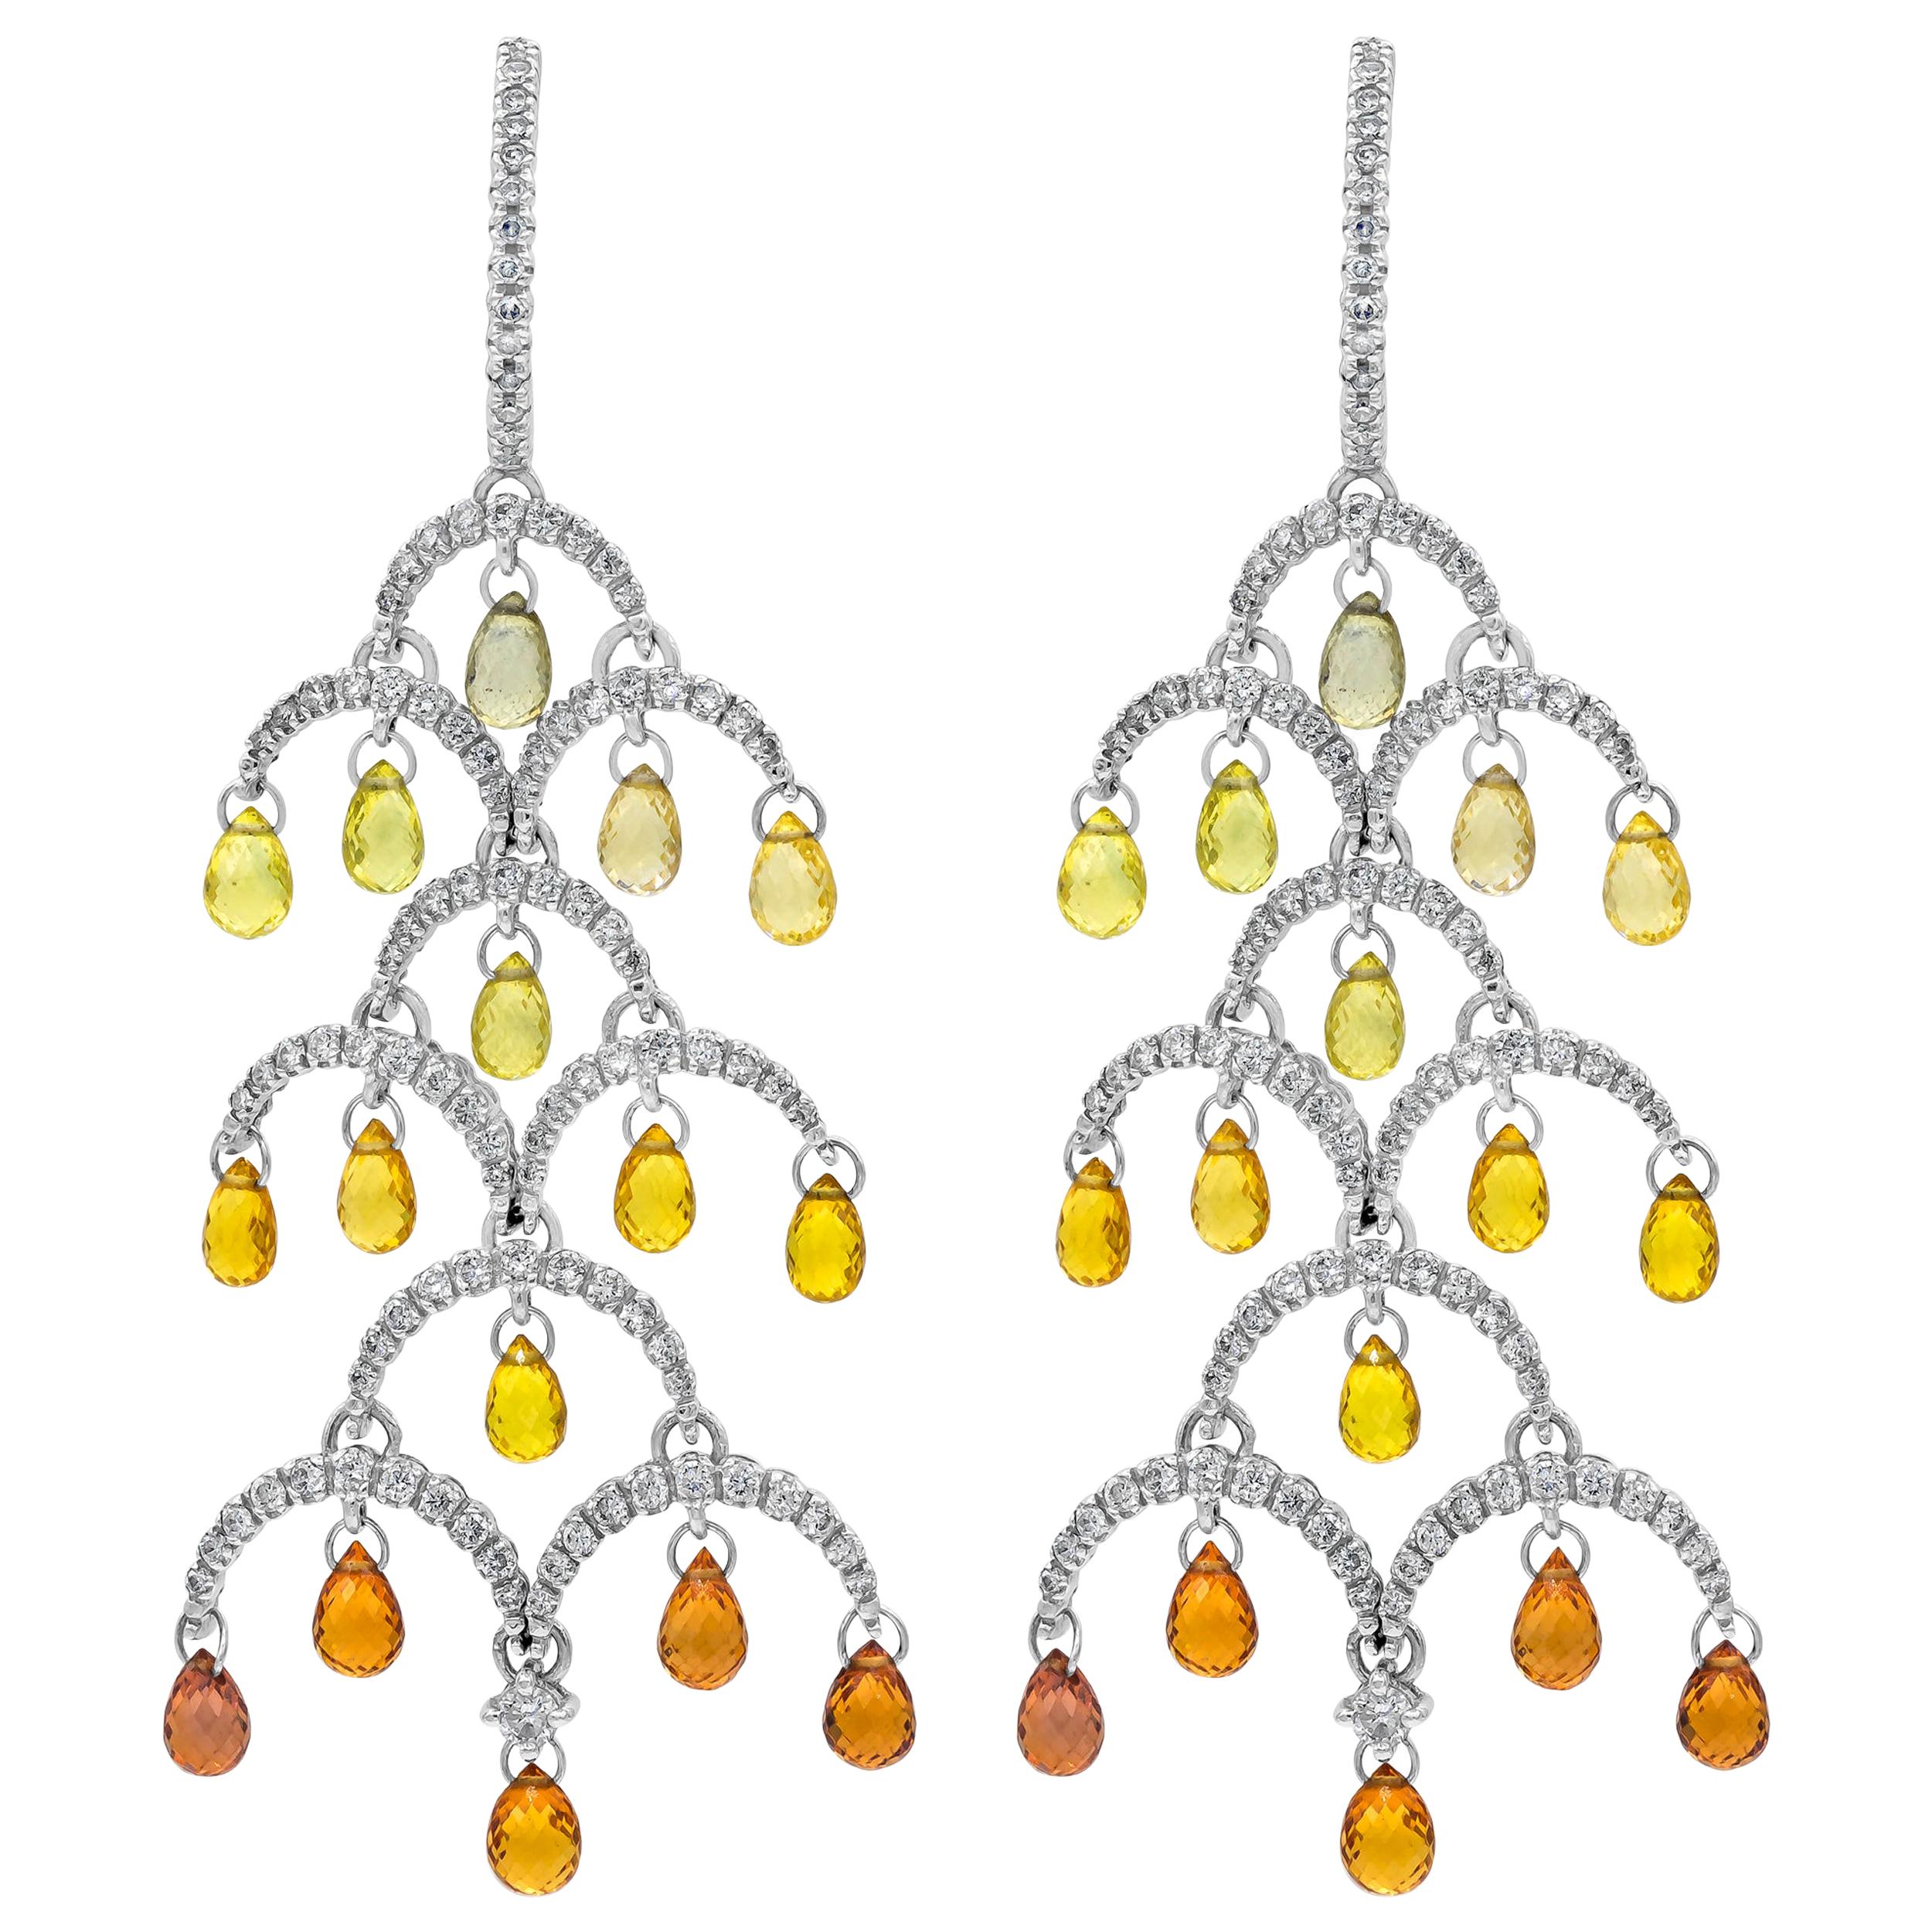 1.97 Carats Total Diamond with Natural Briolette Sapphires Chandelier Earrings